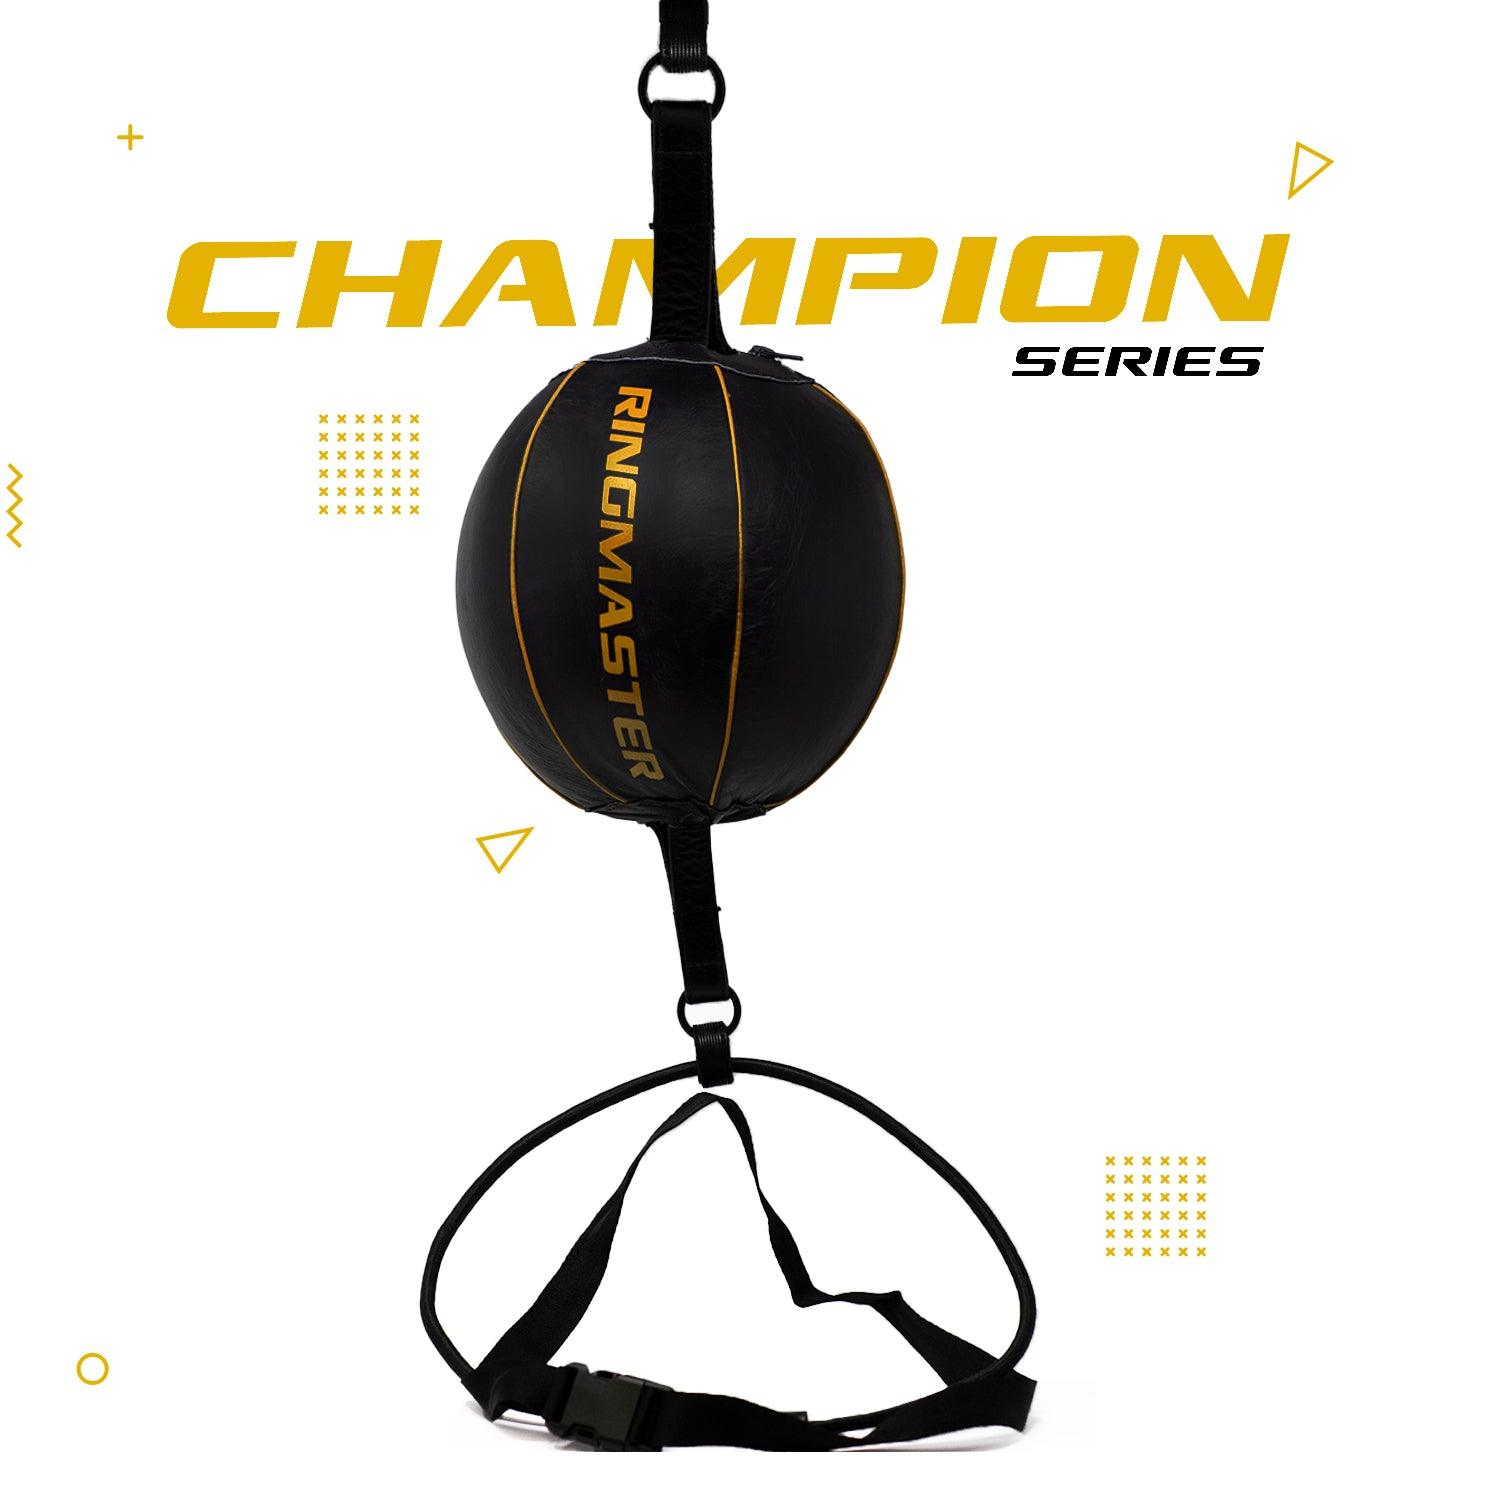 RingMaster Sports Double End Round Speed Ball Champion Series Genuine Leather Gold/Black - RINGMASTER SPORTS - Made For Champions